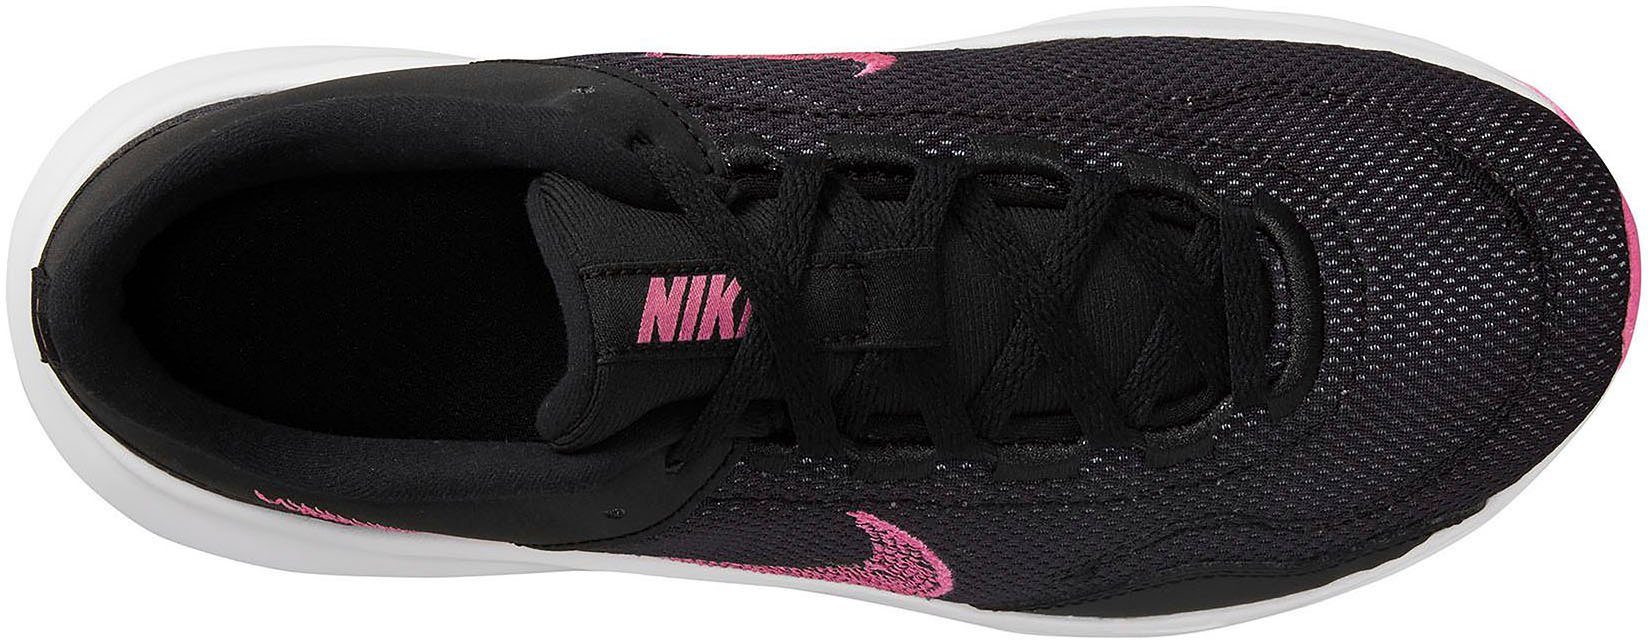 3 LEGEND BLACK-PINKSICLE-PARTICLE-GREY ESSENTIAL Nike Fitnessschuh